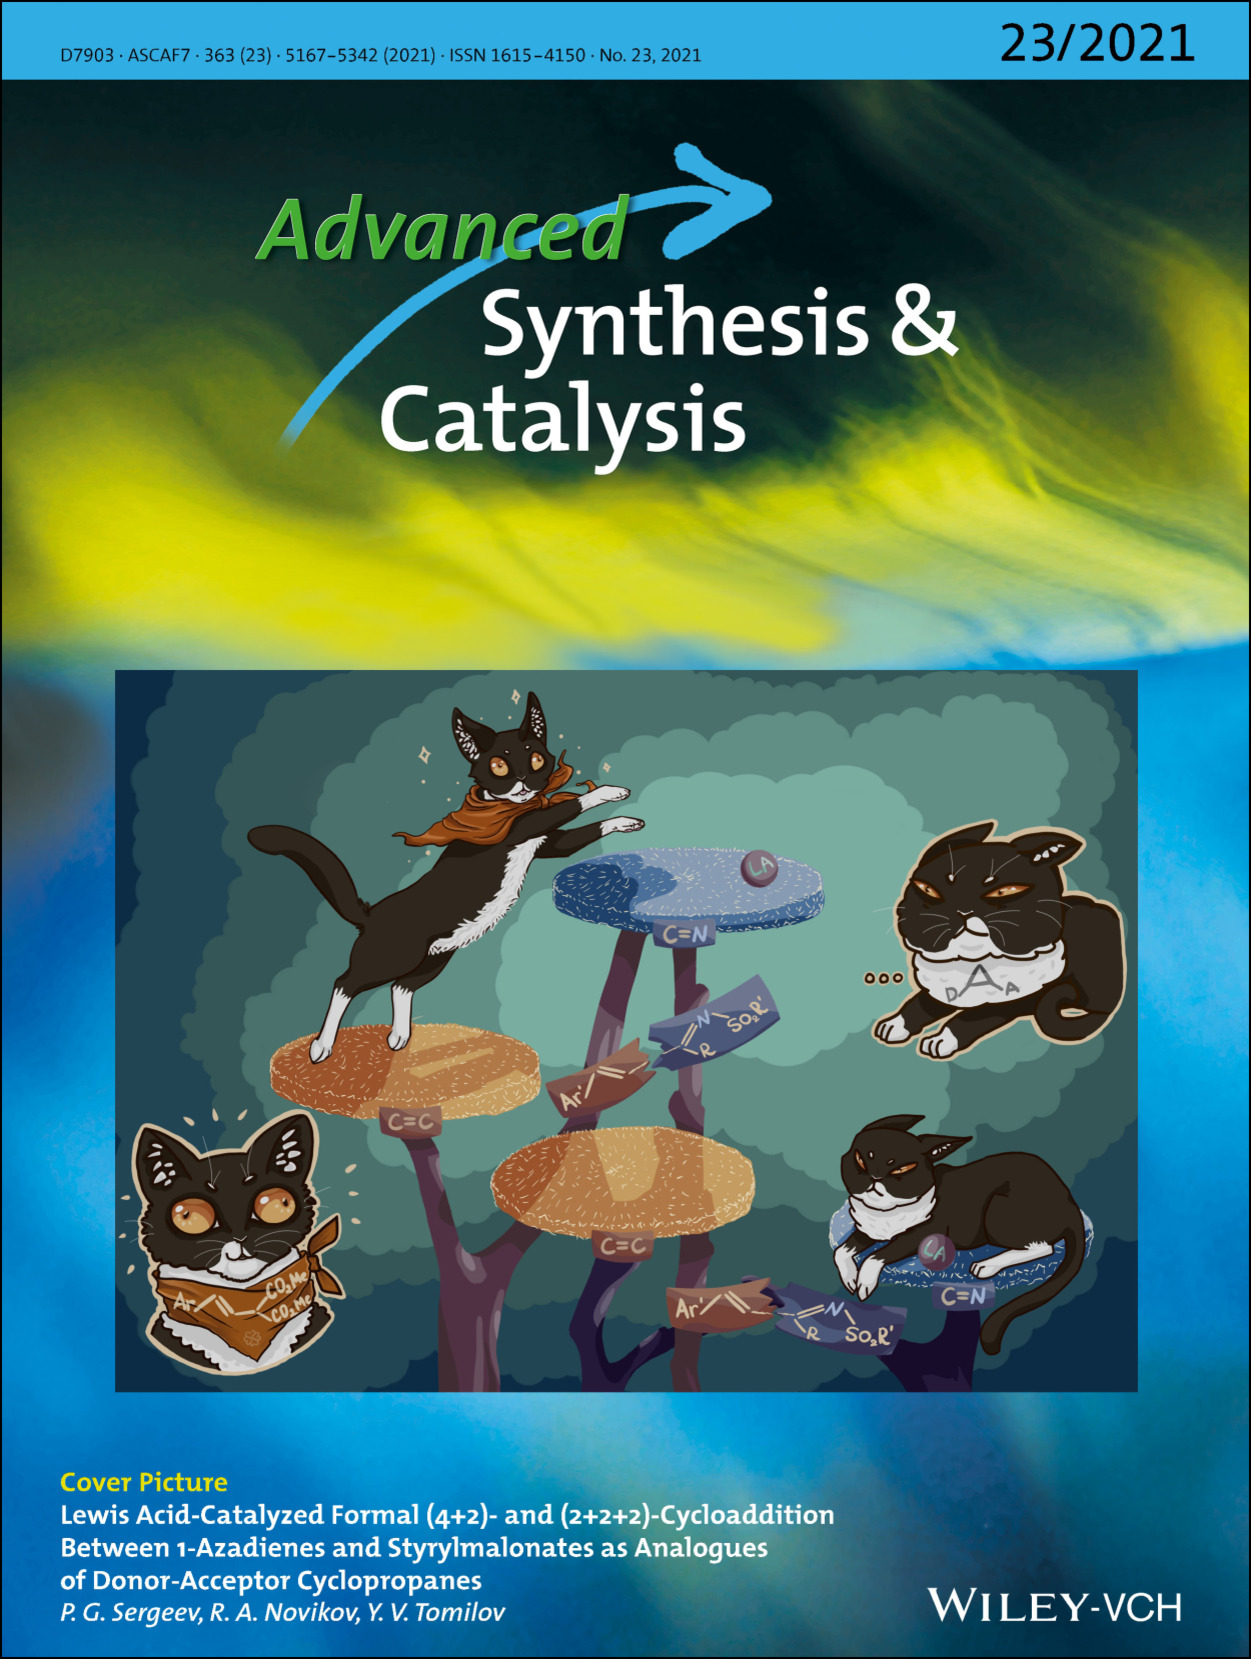 Front Cover Picture: Lewis Acid‐Catalyzed Formal (4+2)‐ and (2+2+2)‐Cycloaddition Between 1‐Azadienes and Styrylmalonates as Analogues of Donor‐Acceptor Cyclopropanes (Adv. Synth. Catal. 23/2021)